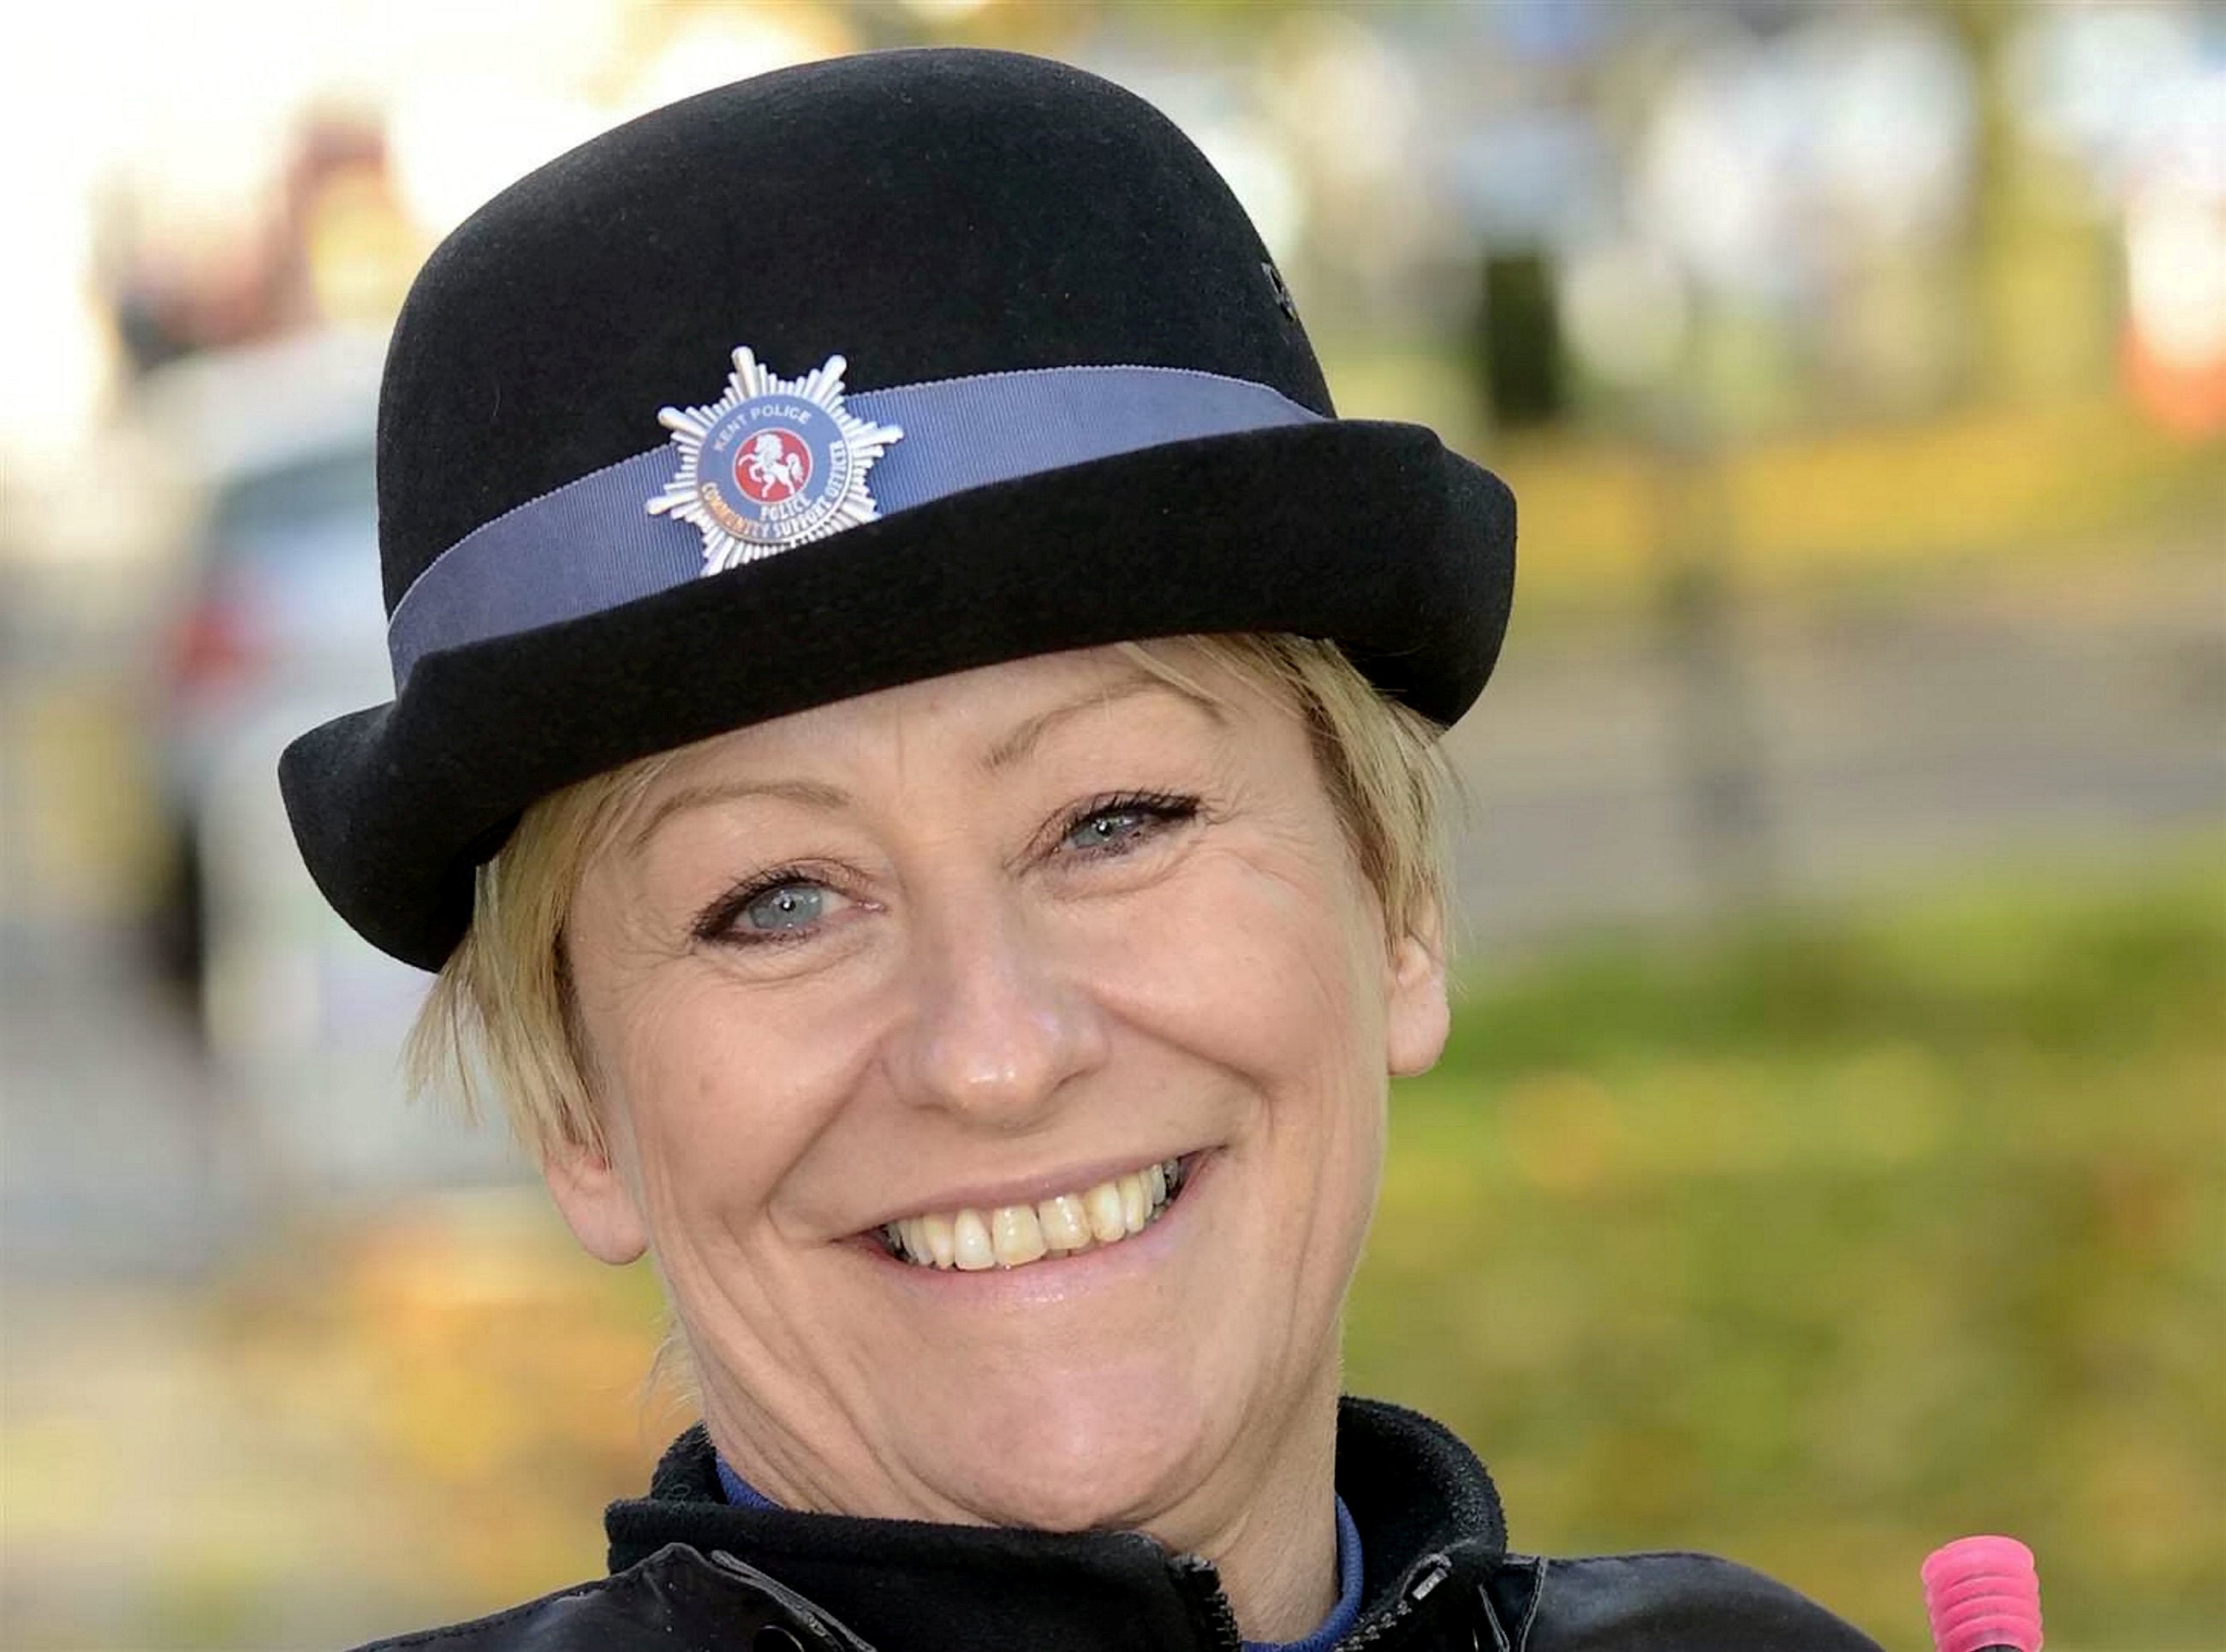 PCSO Julia James was off duty and not in uniform when she was attacked while walking her dog